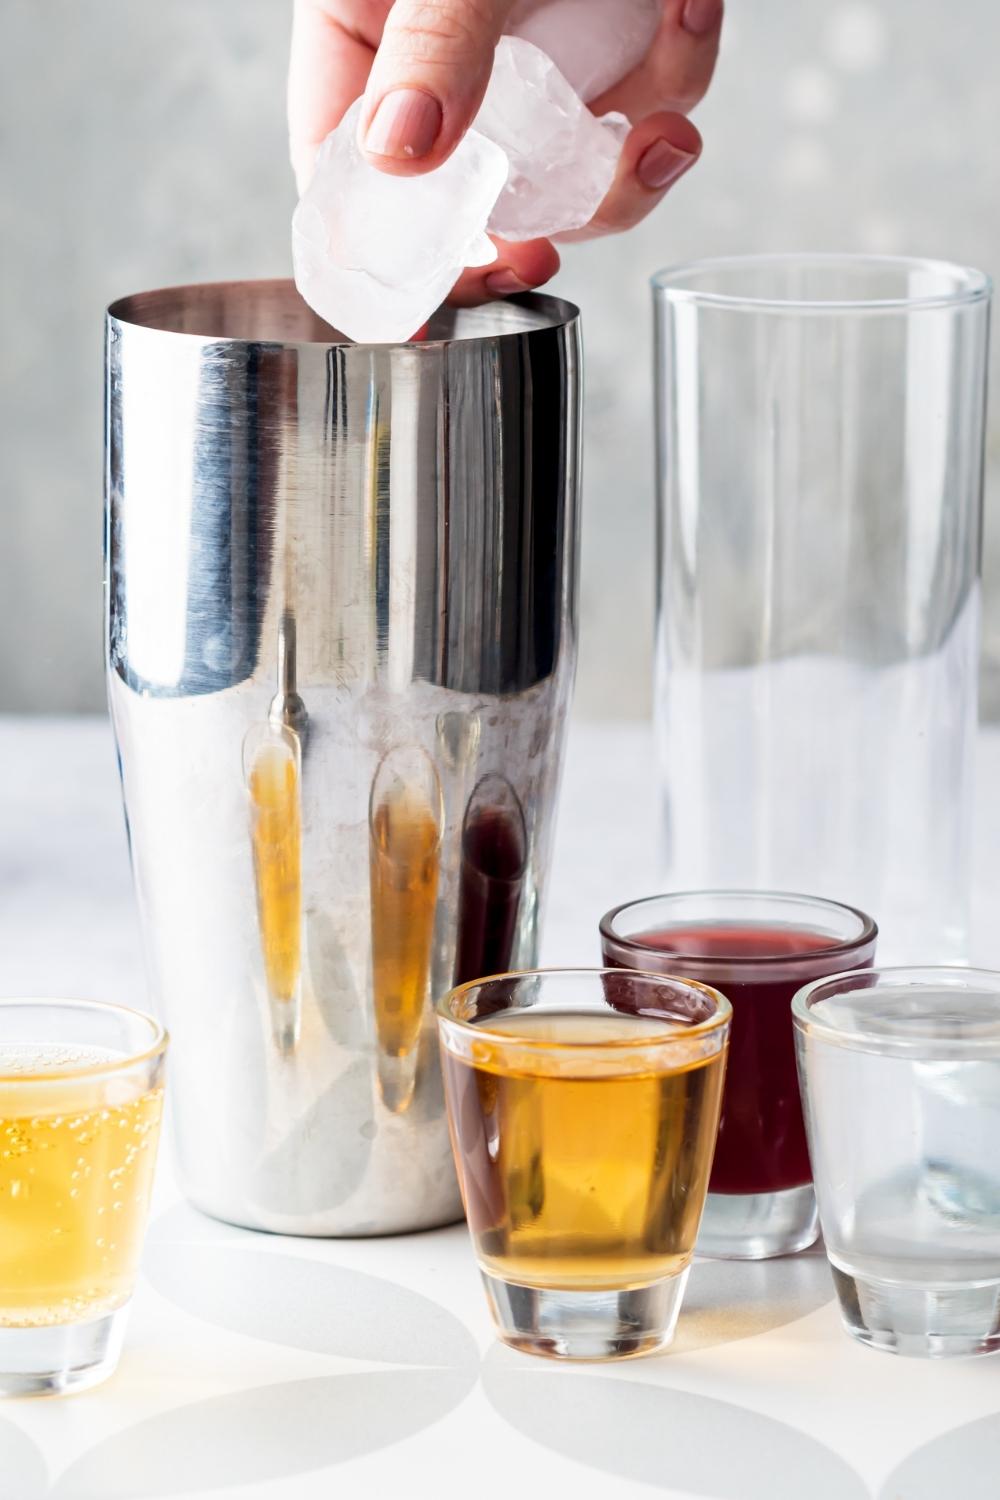 A cocktail shaker on a countertop next to an empty glass. Shot glasses it on the countertop around the shaker containing alcohol to make a Vegas bomb shot. A hand is dumping ice cubes into the shaker.